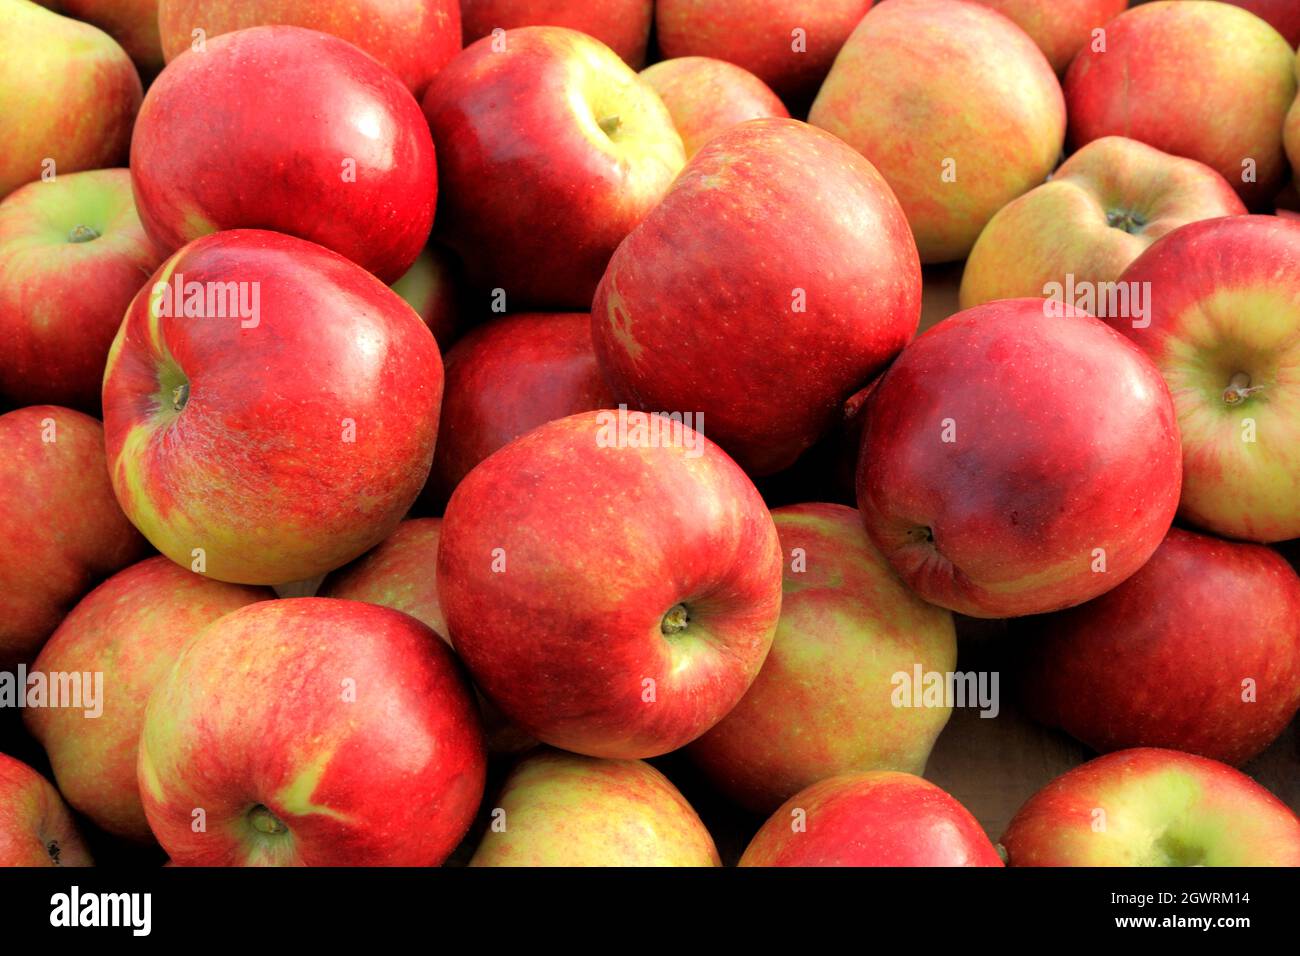 Apple 'Herrings Pippin', apples, farm shop display, malus domestica, fruit, healthy eating Stock Photo